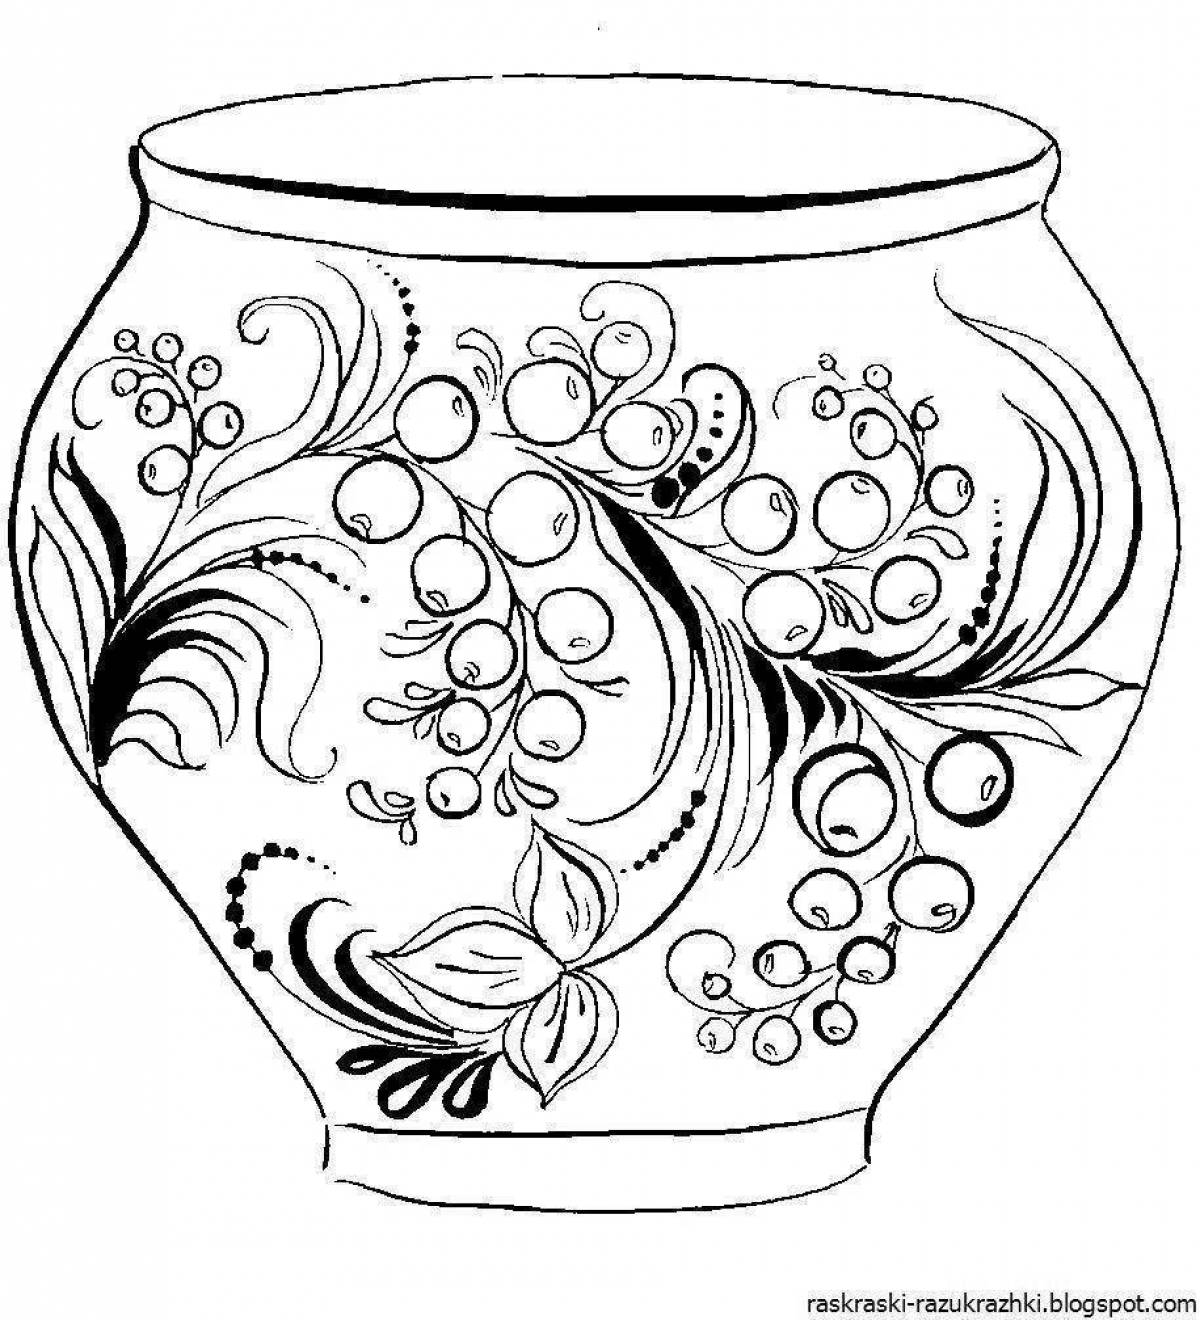 Fancy charon all coloring pages